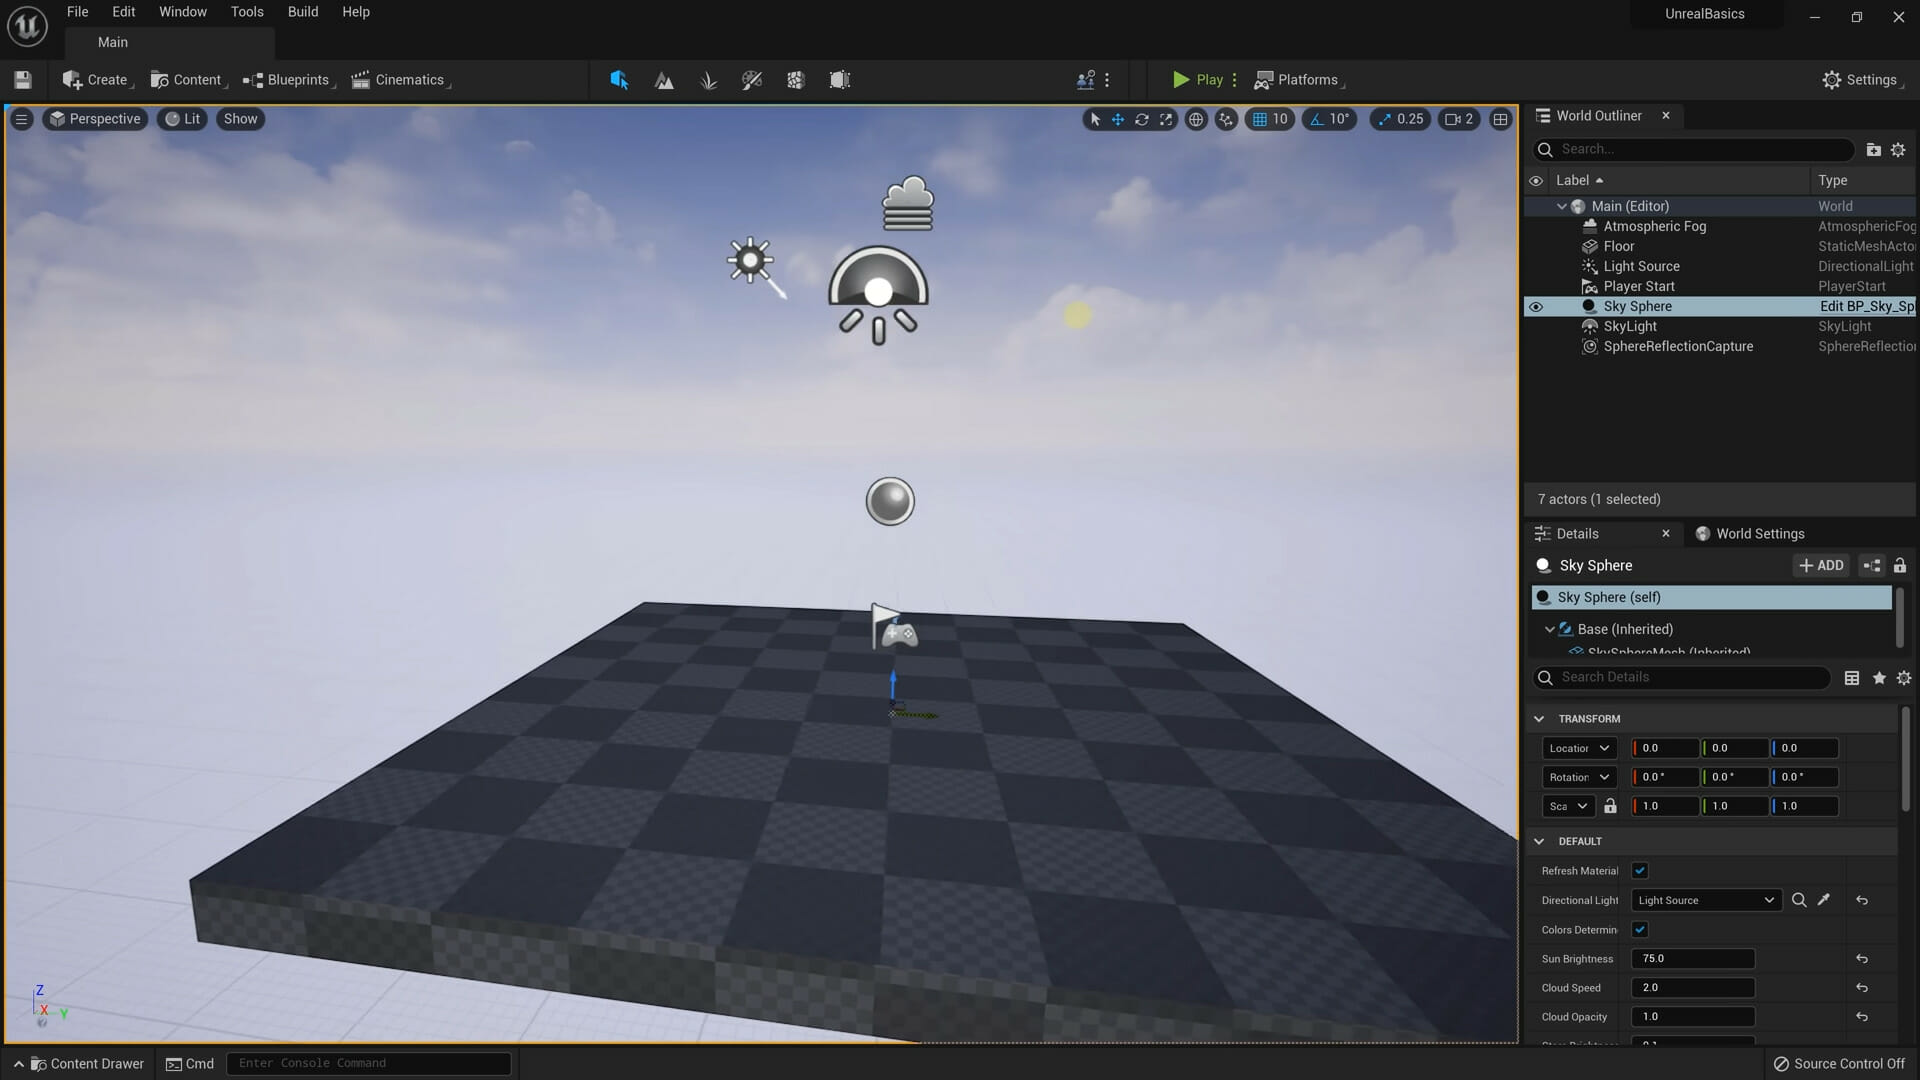 Why should you care about Unreal Engine 5?